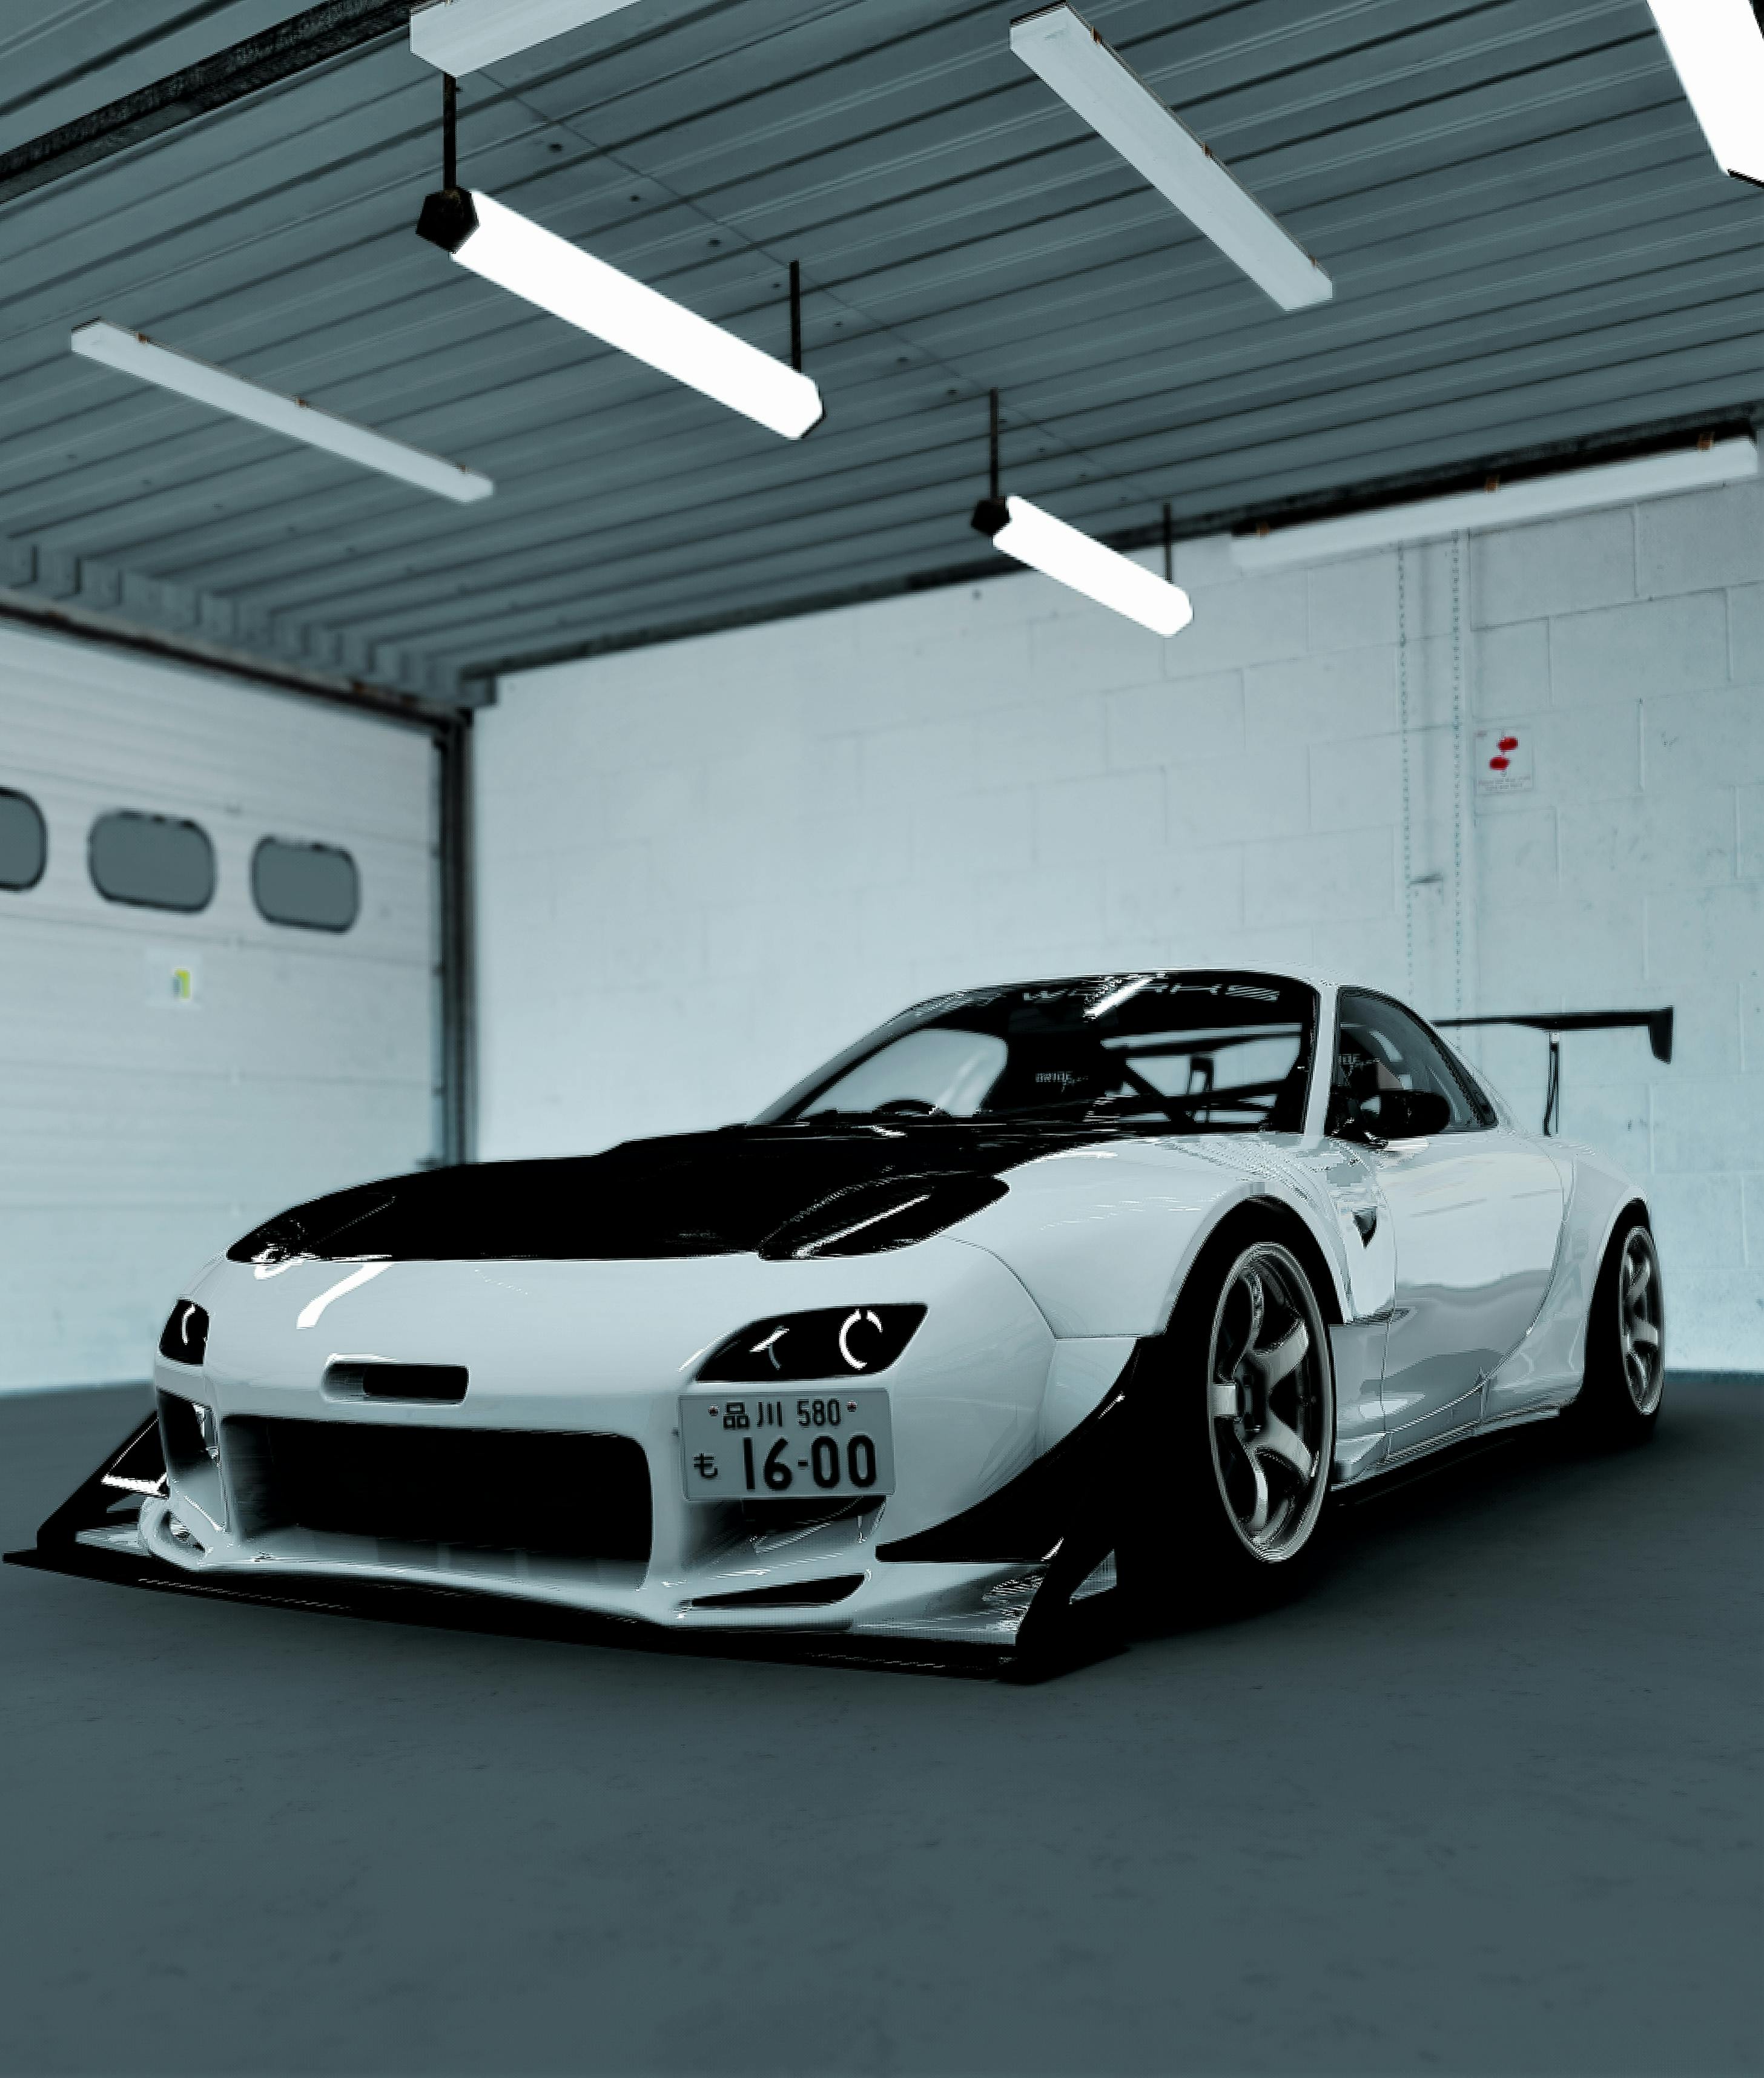 Mazda Rx7 Photos, Download The BEST Free Mazda Rx7 Stock Photos